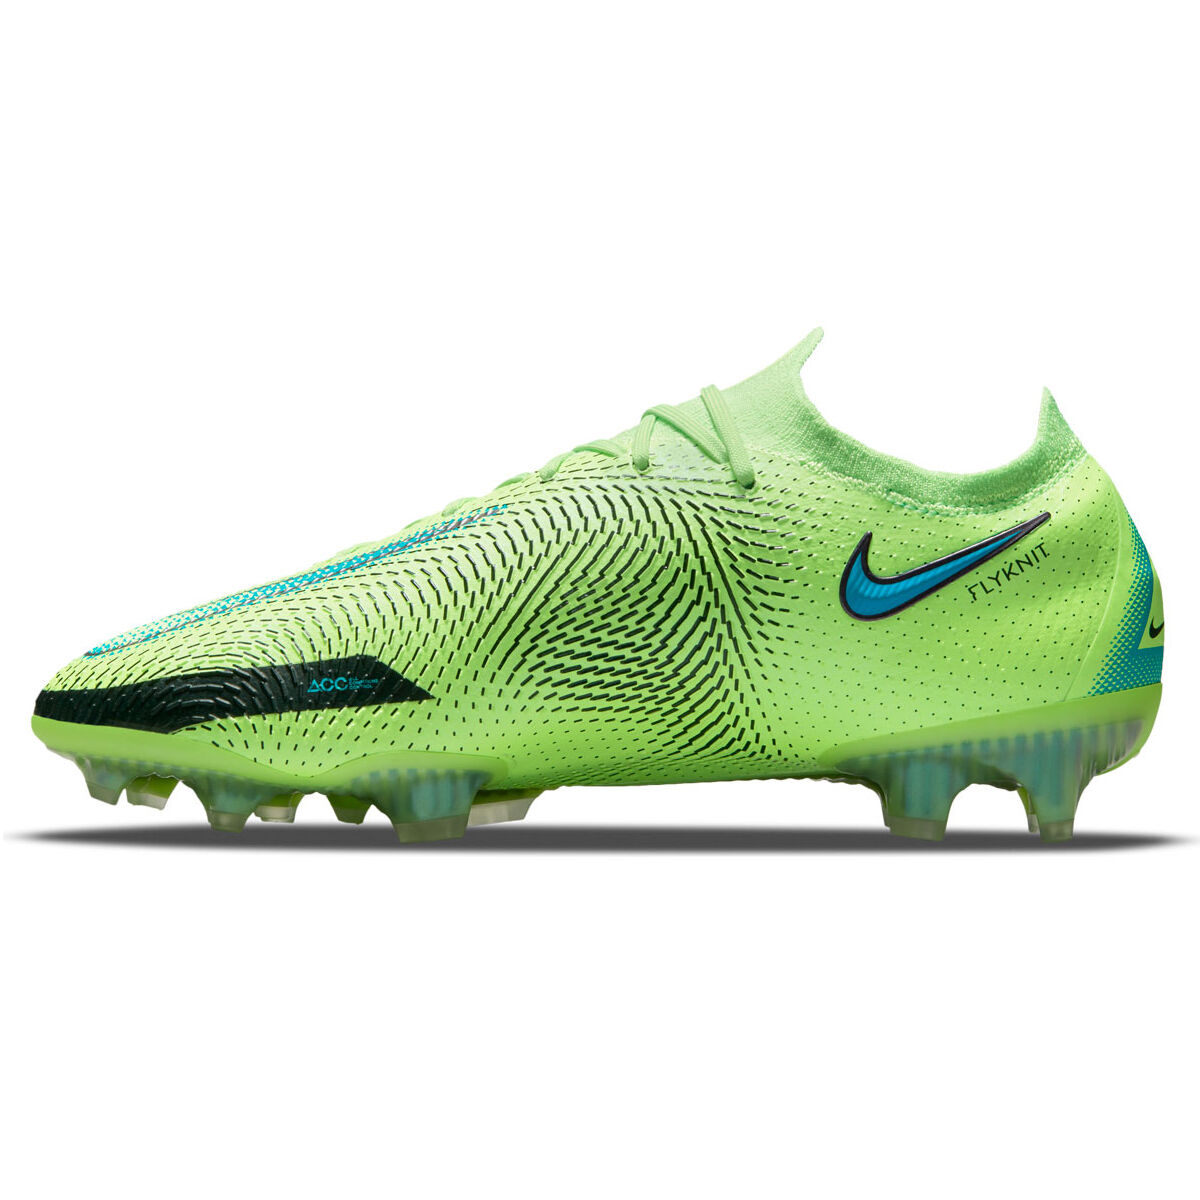 nike rugby boots for sale